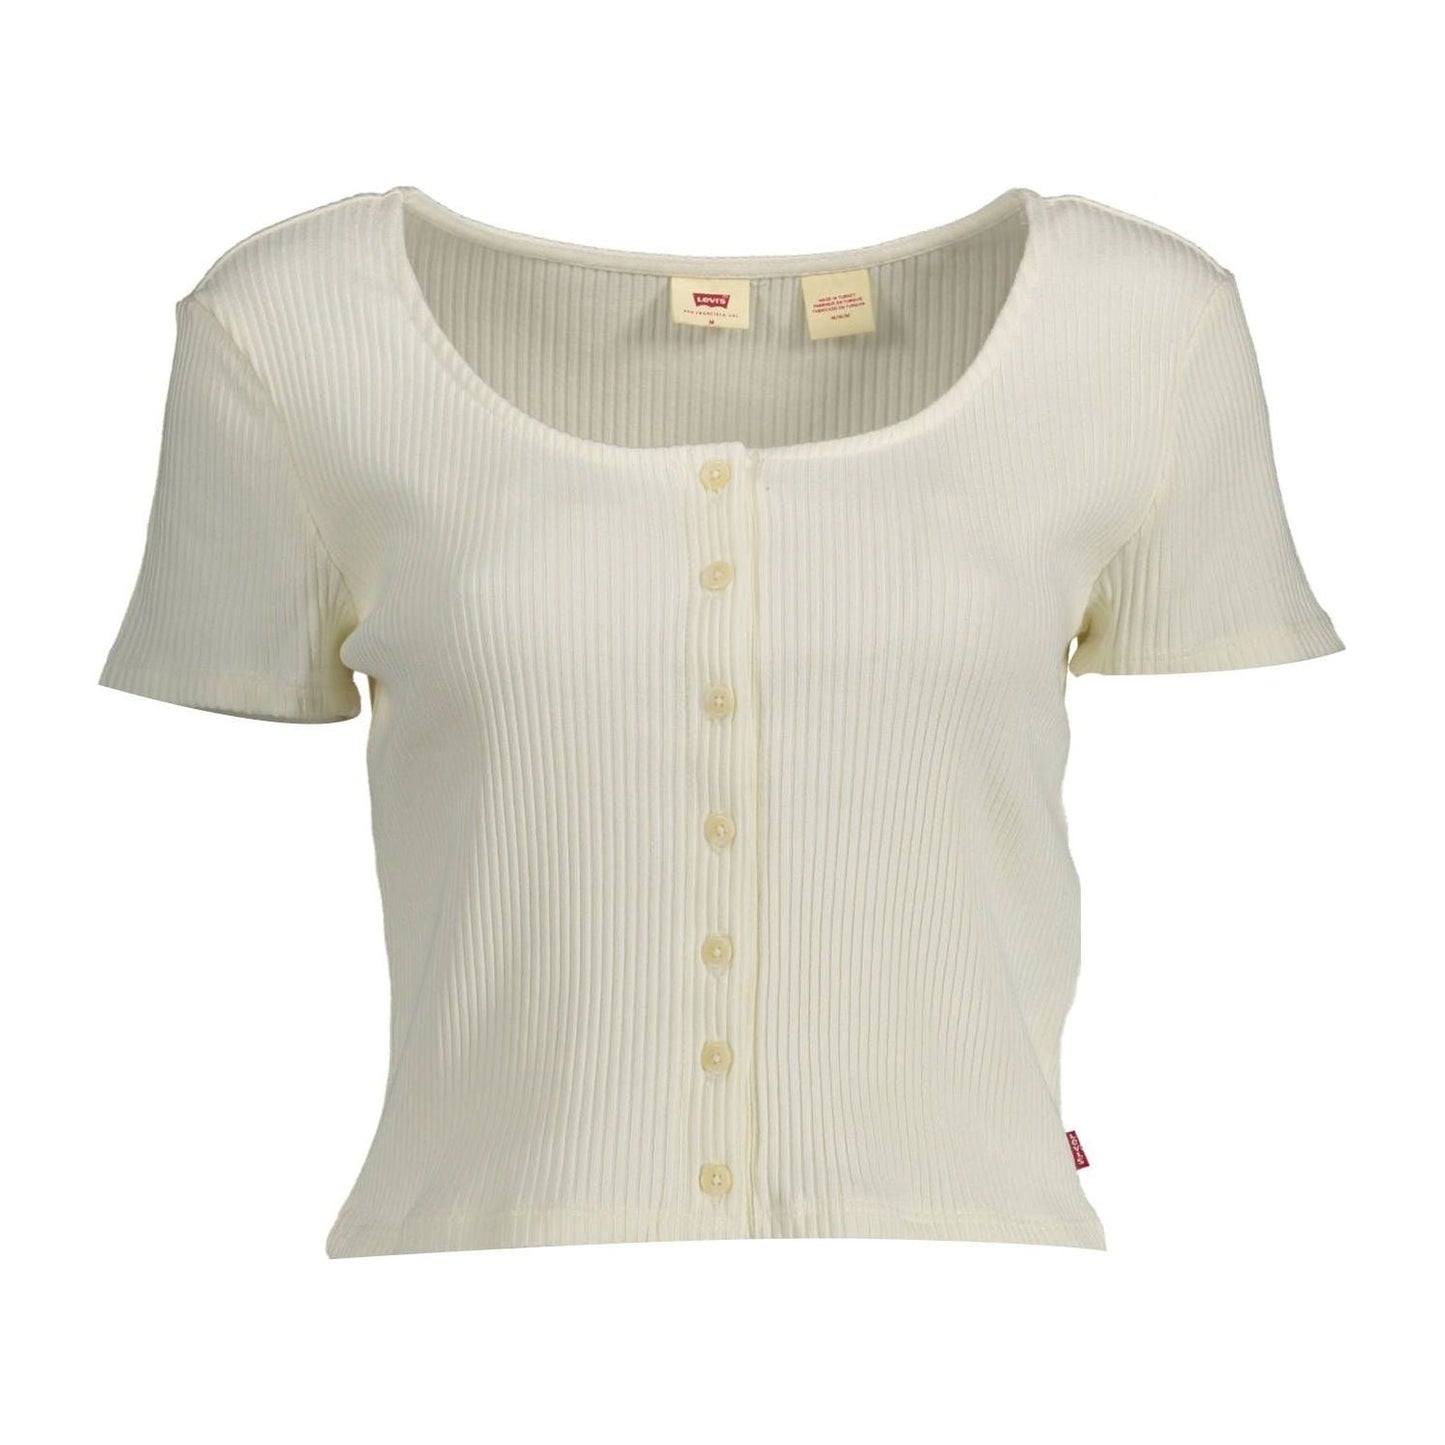 Levi's Chic White Buttoned Tee with Wide Neckline chic-white-buttoned-tee-with-wide-neckline